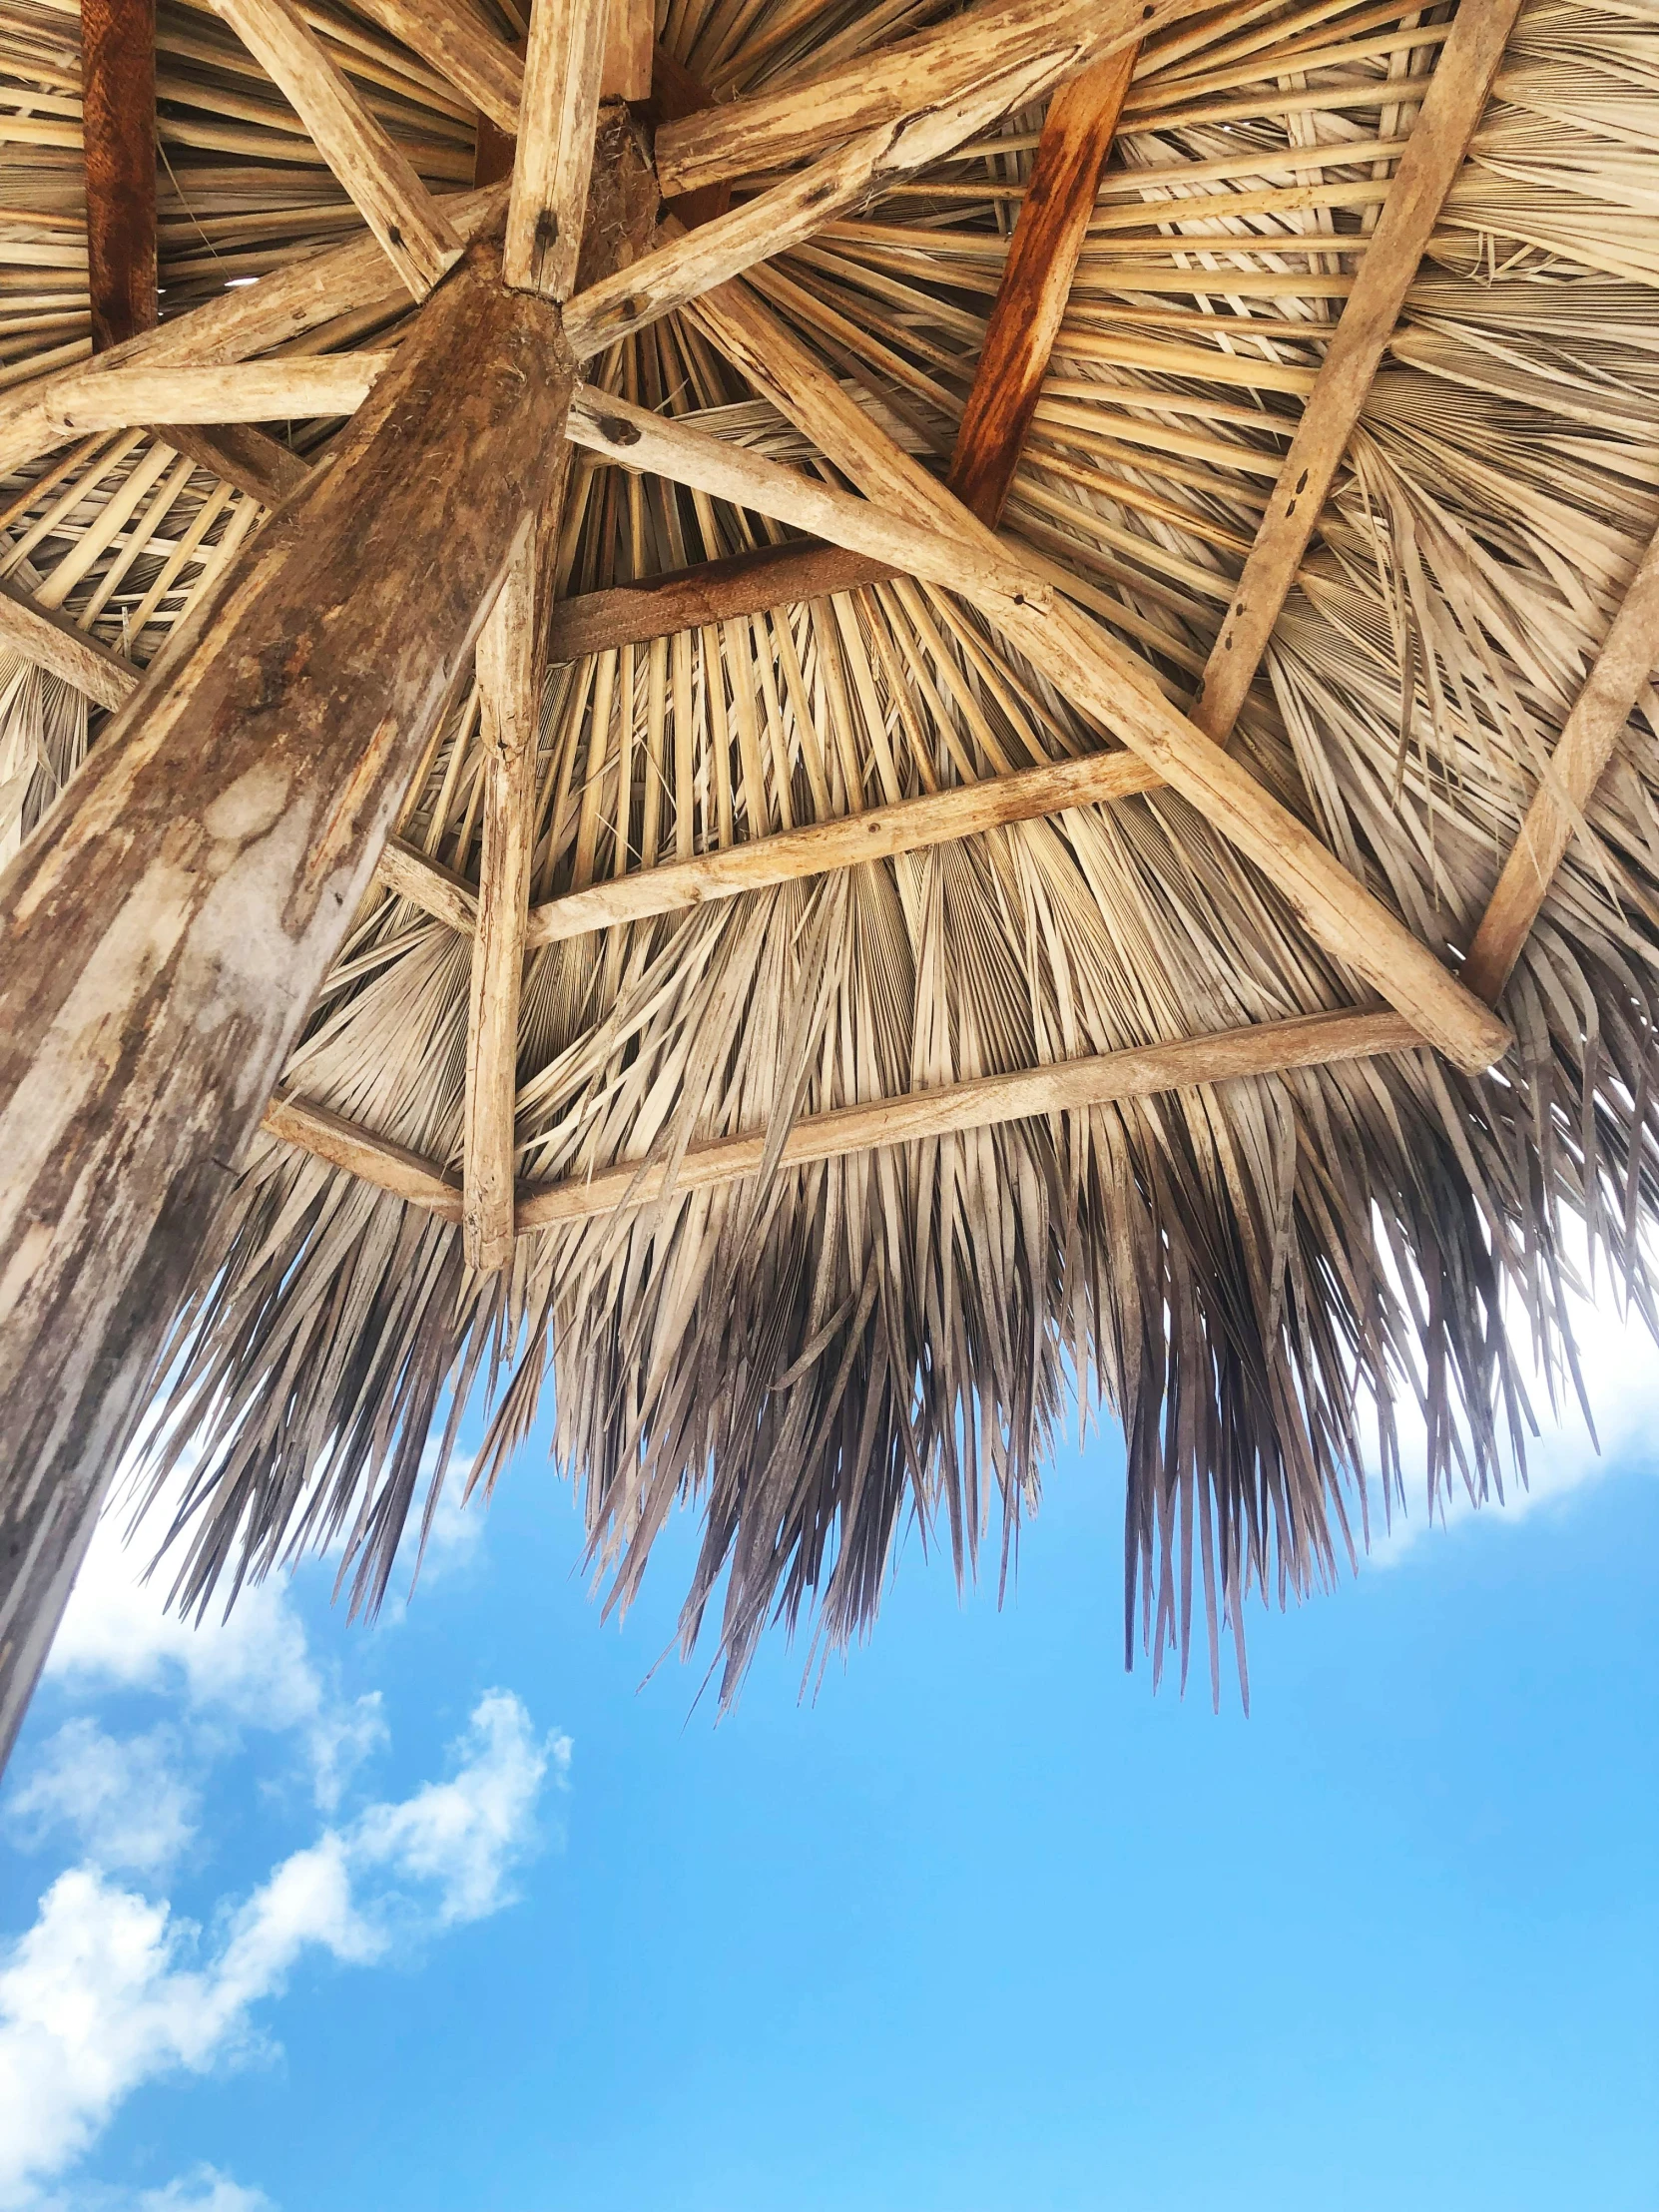 straw thatched umbrellas with blue sky in background